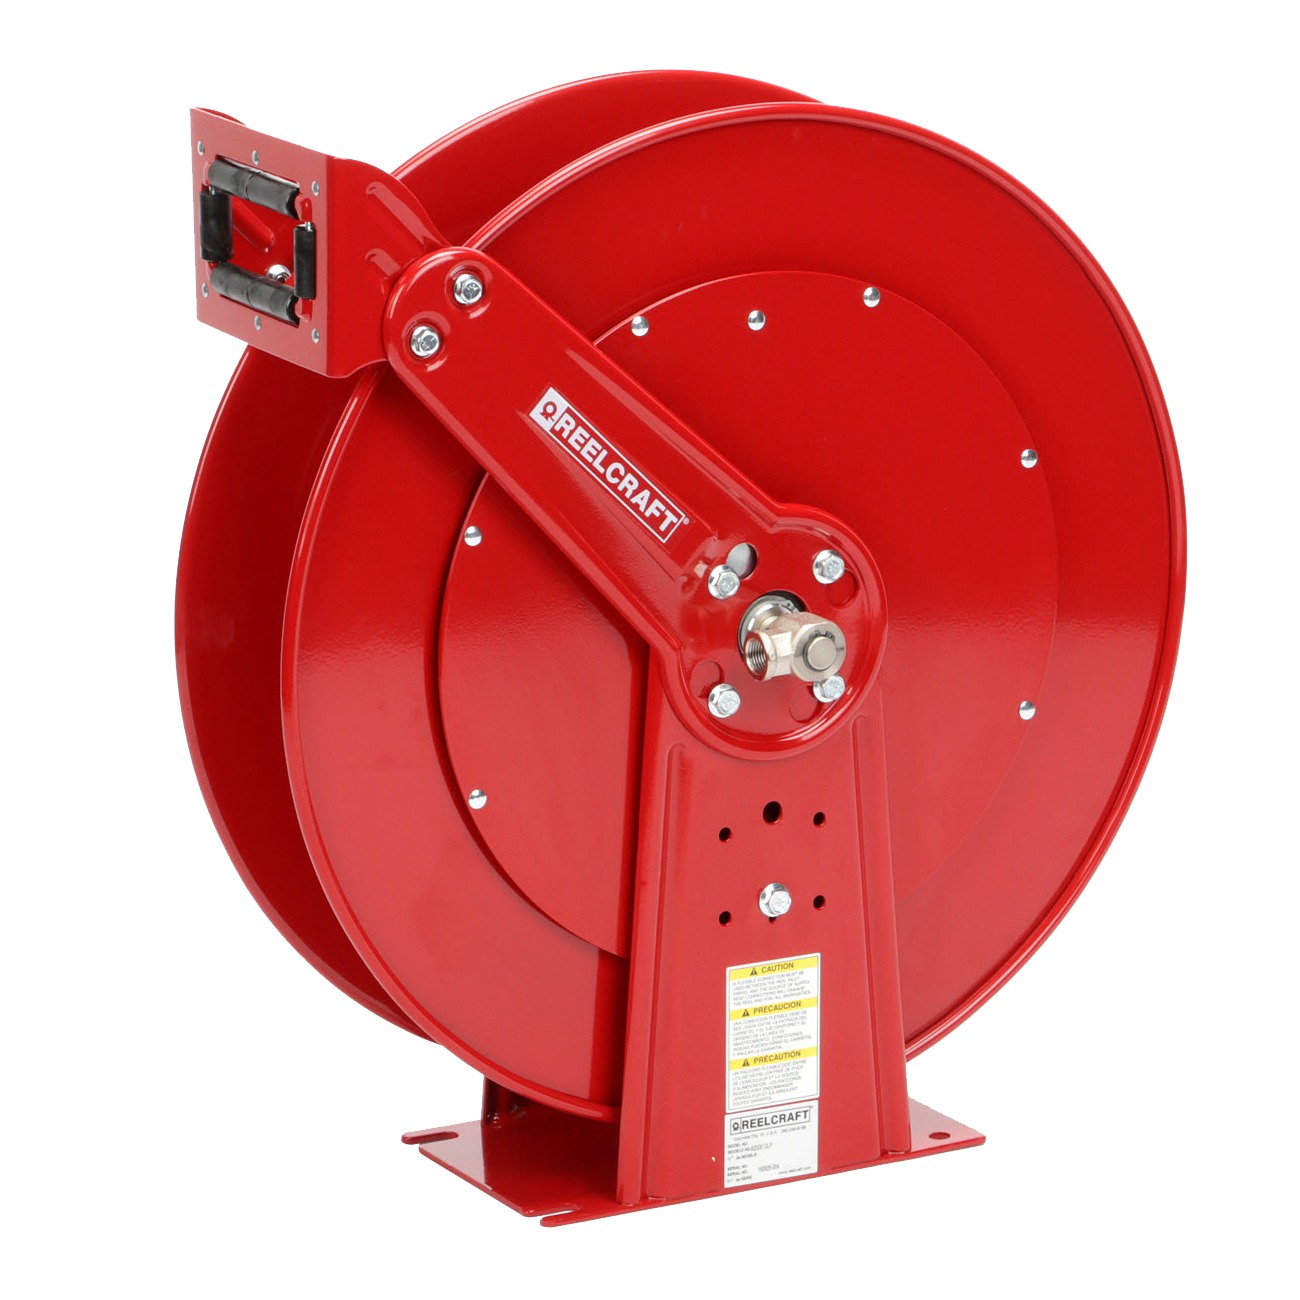 Reelcraft H18000 M Hand Crank Hose Reel 1/2 x 200ft, 3000 psi, for Oil  service - hose not included